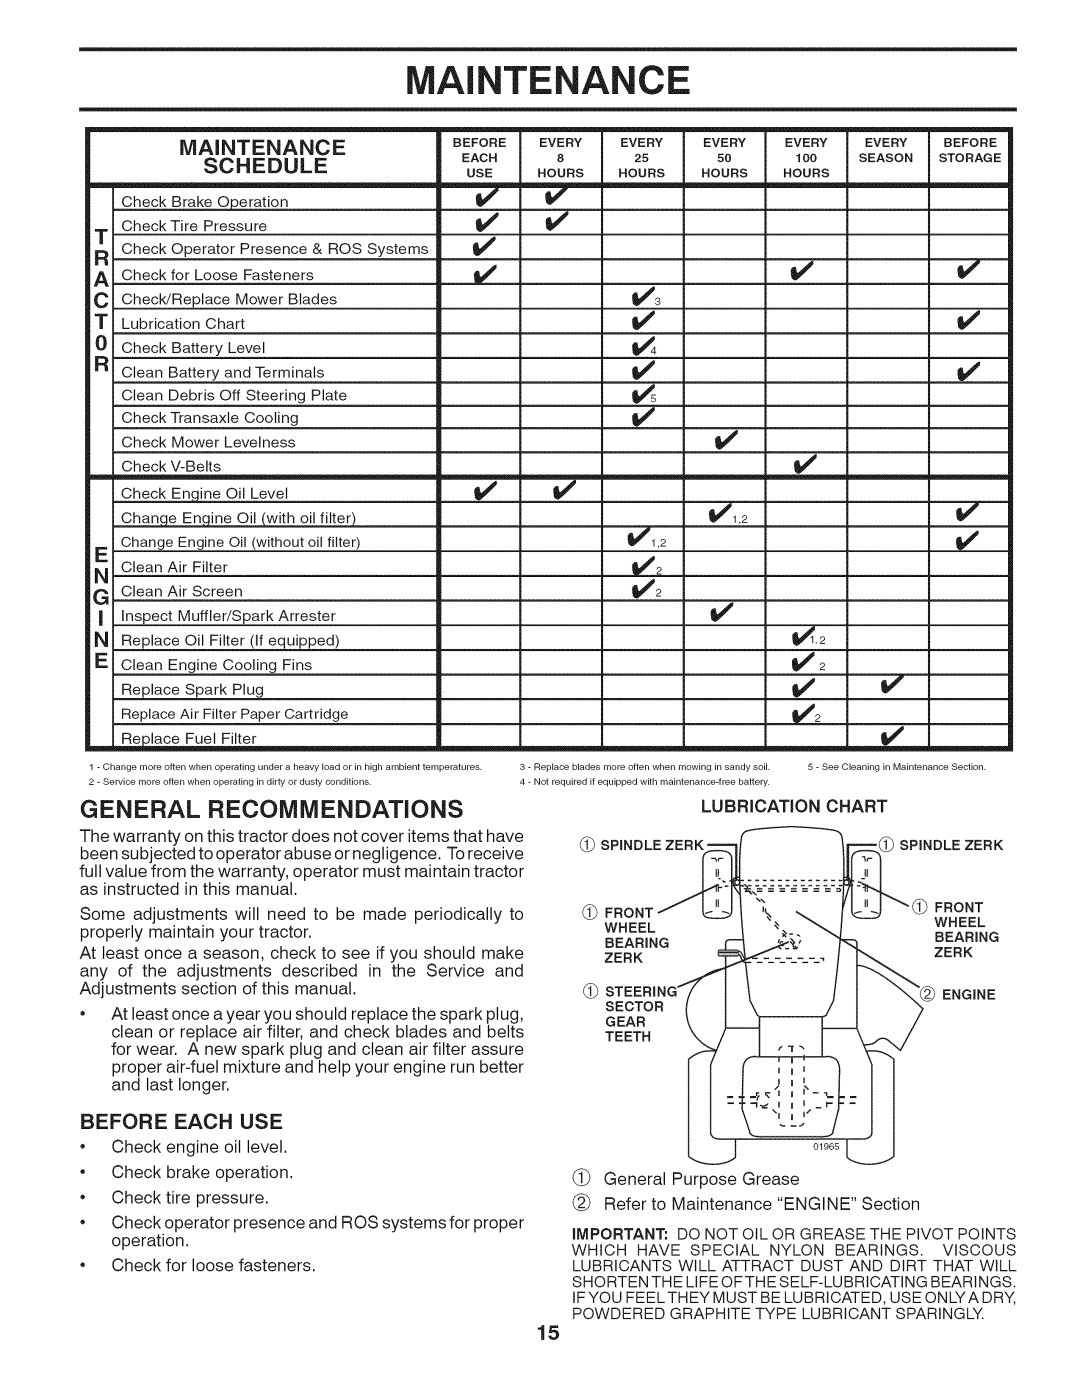 Husqvarna LTH18538 owner manual Maintenance, General Recommendations, vv vv, Schedule, Before Each Use, Lubrication 